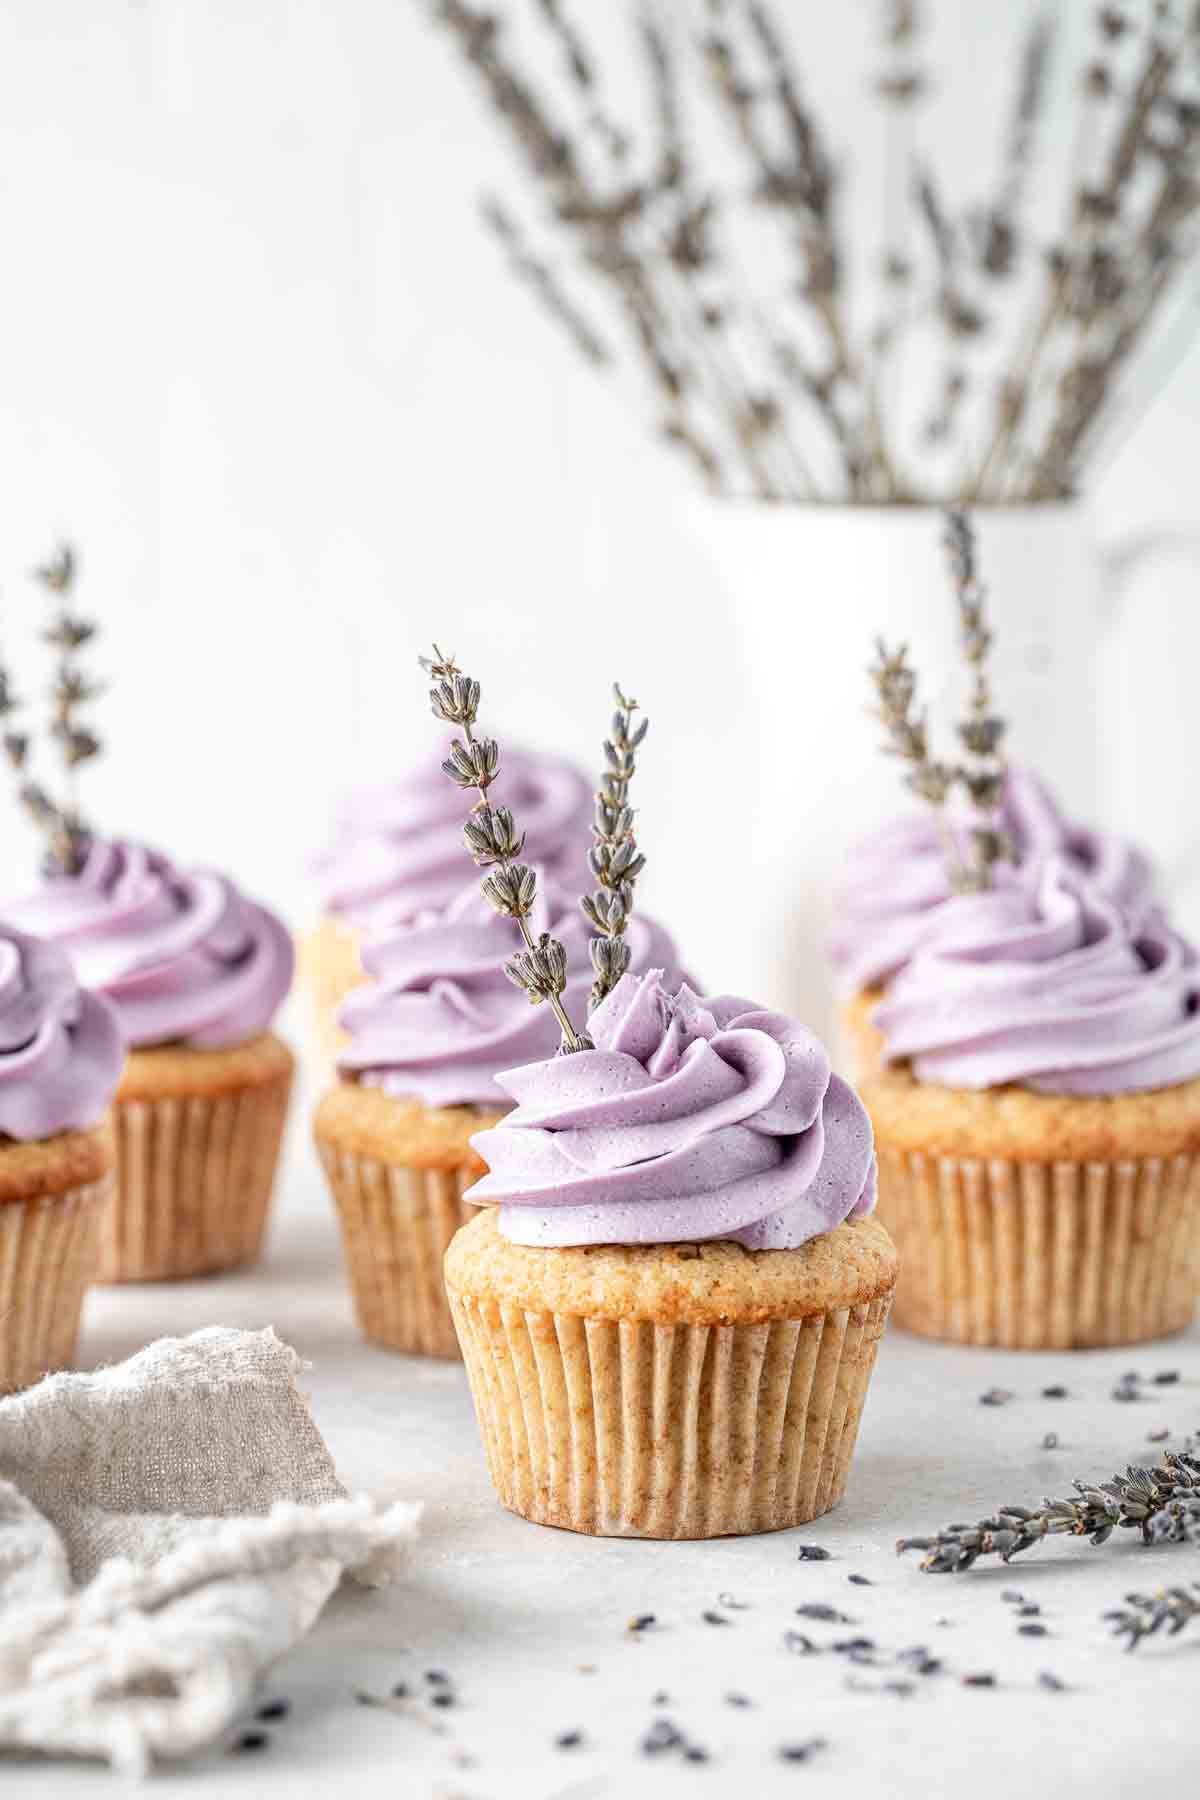 Earl grey lavender cupcakes with lavender sprigs.